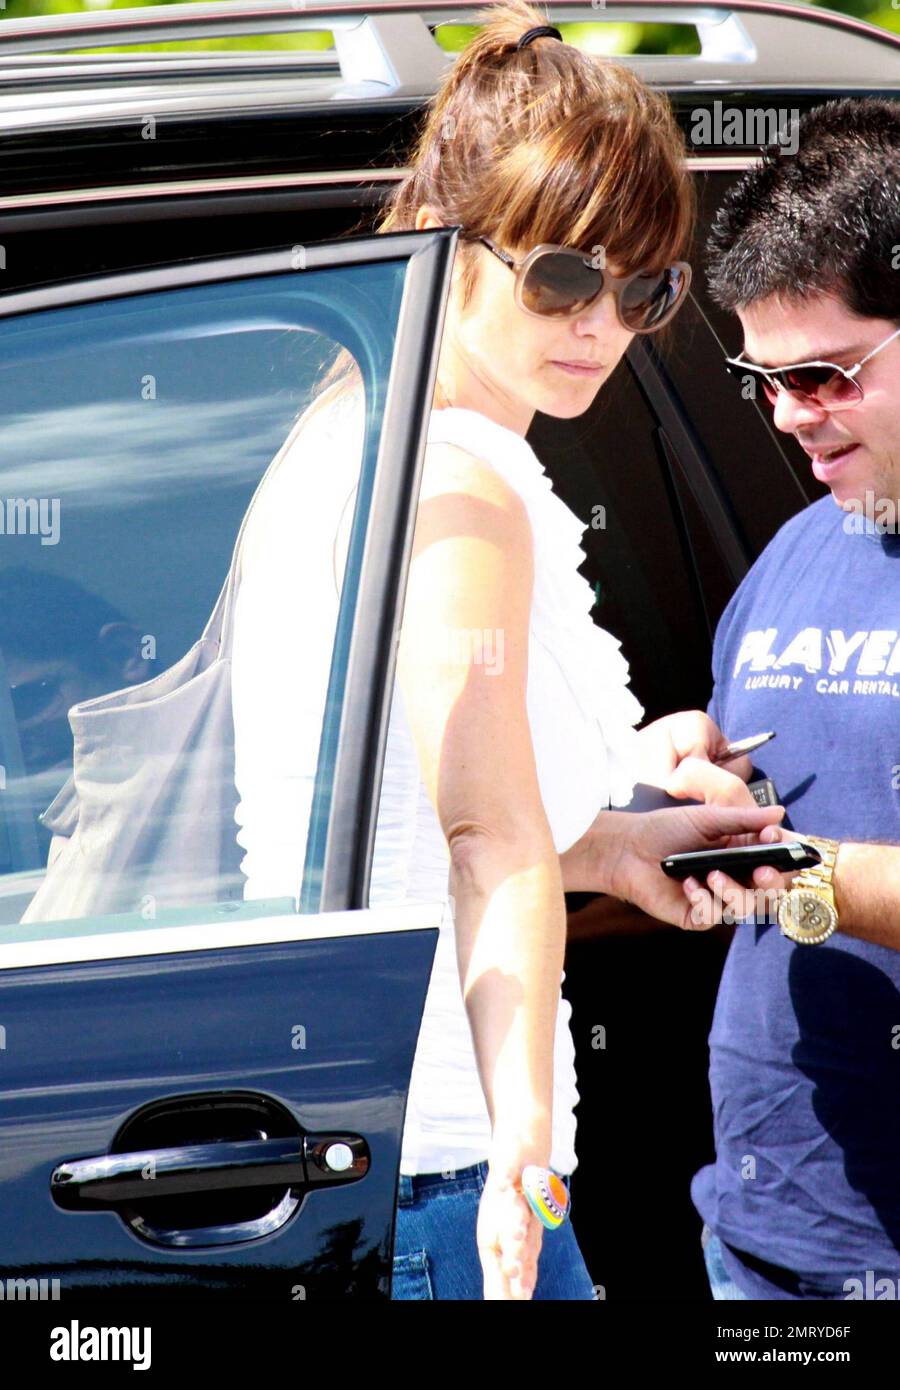 Argentinian couple, actor Fabian Mazzei and girlfriend model and actress Araceli Gonzalez appear to pay a valet at their luxury hotel before heading off after a weekend getaway in Miami.  Friendly Araceli, decked out in a simple white one-shoulder ruffle top, flare jeans and cute wedge platforms, dealt with the staff while Fabian and son waited in the car.  Miami, FL. 10/03/10. Stock Photo